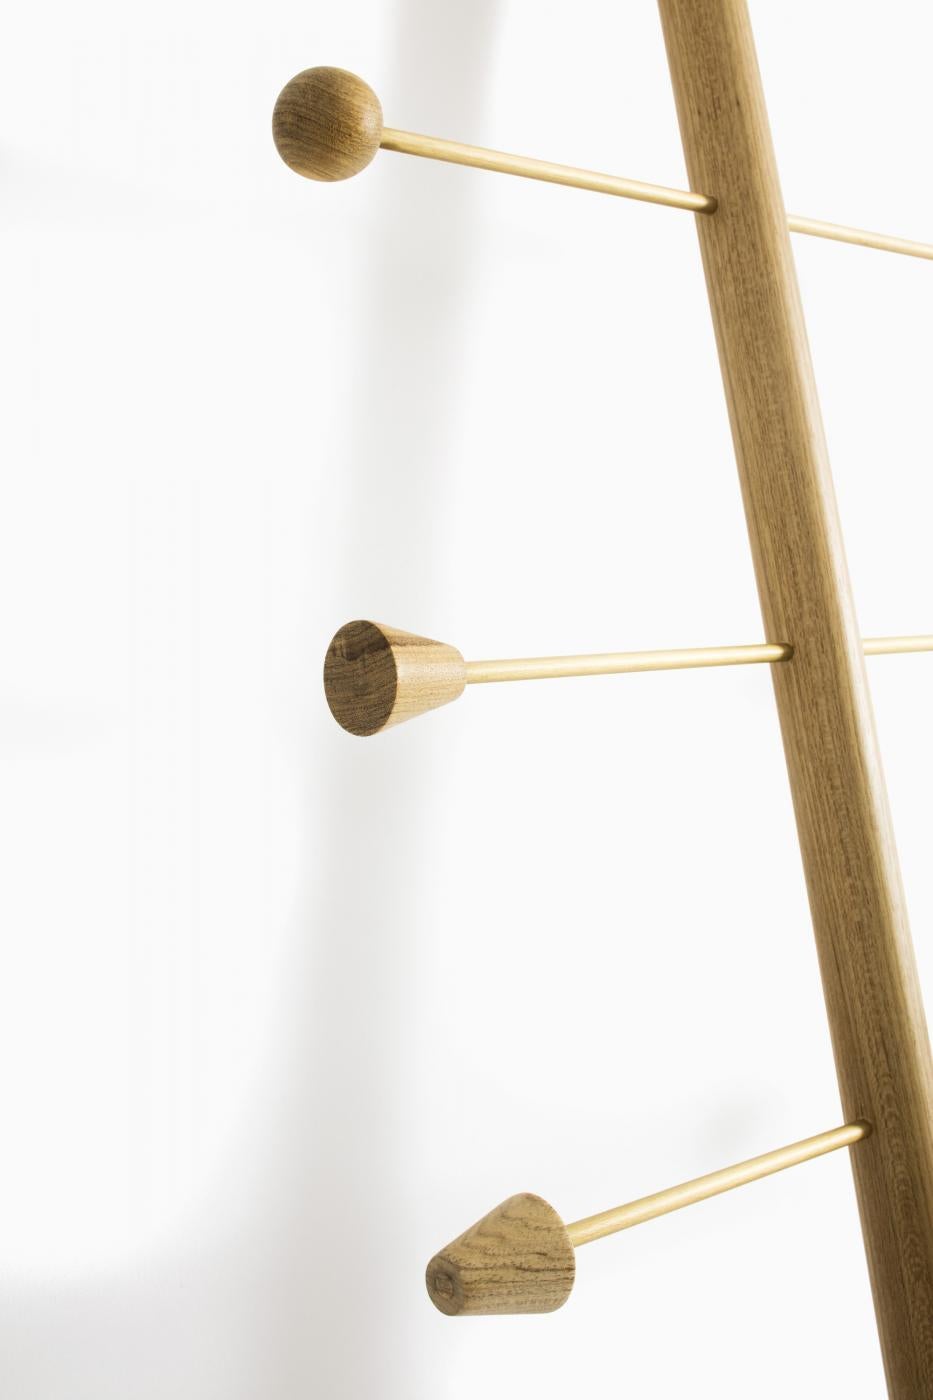 Mancebo Santiago
Supported on the wall, it can be used to place purses, coats, hats and even a lamp.
Minimalist mancebo that ornates metal with wood to create a slender and elegant shape. It can compose any environment without taking up much space,